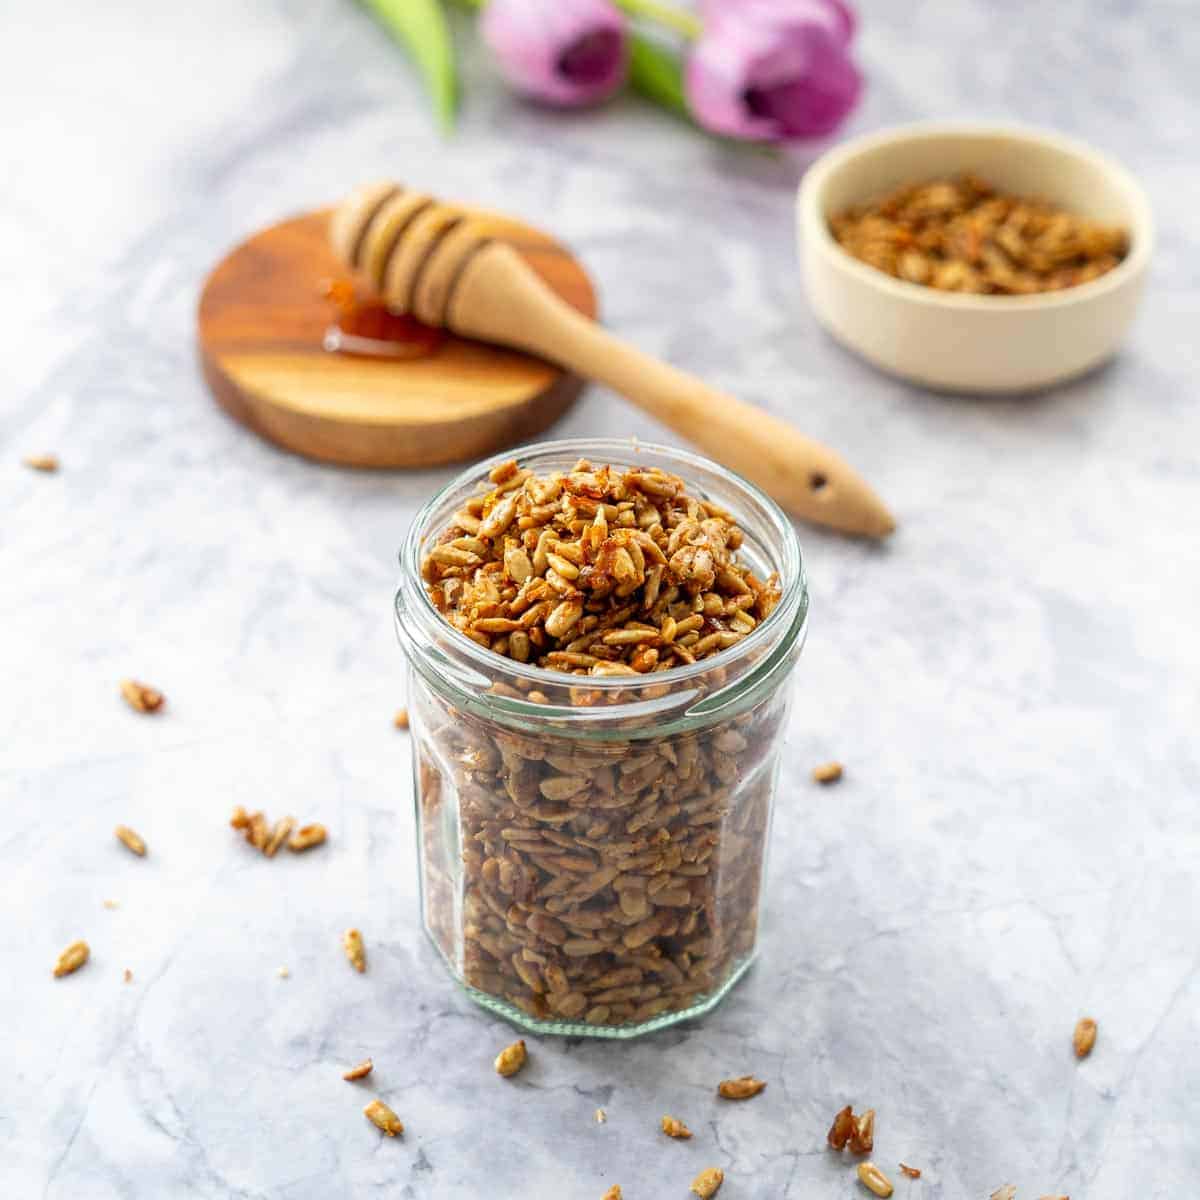 A clear jar filled with honey roasted sunflower seeds. In the background is a honey dipper stick dripping onto a wooden coaster with a side of roasted seeds